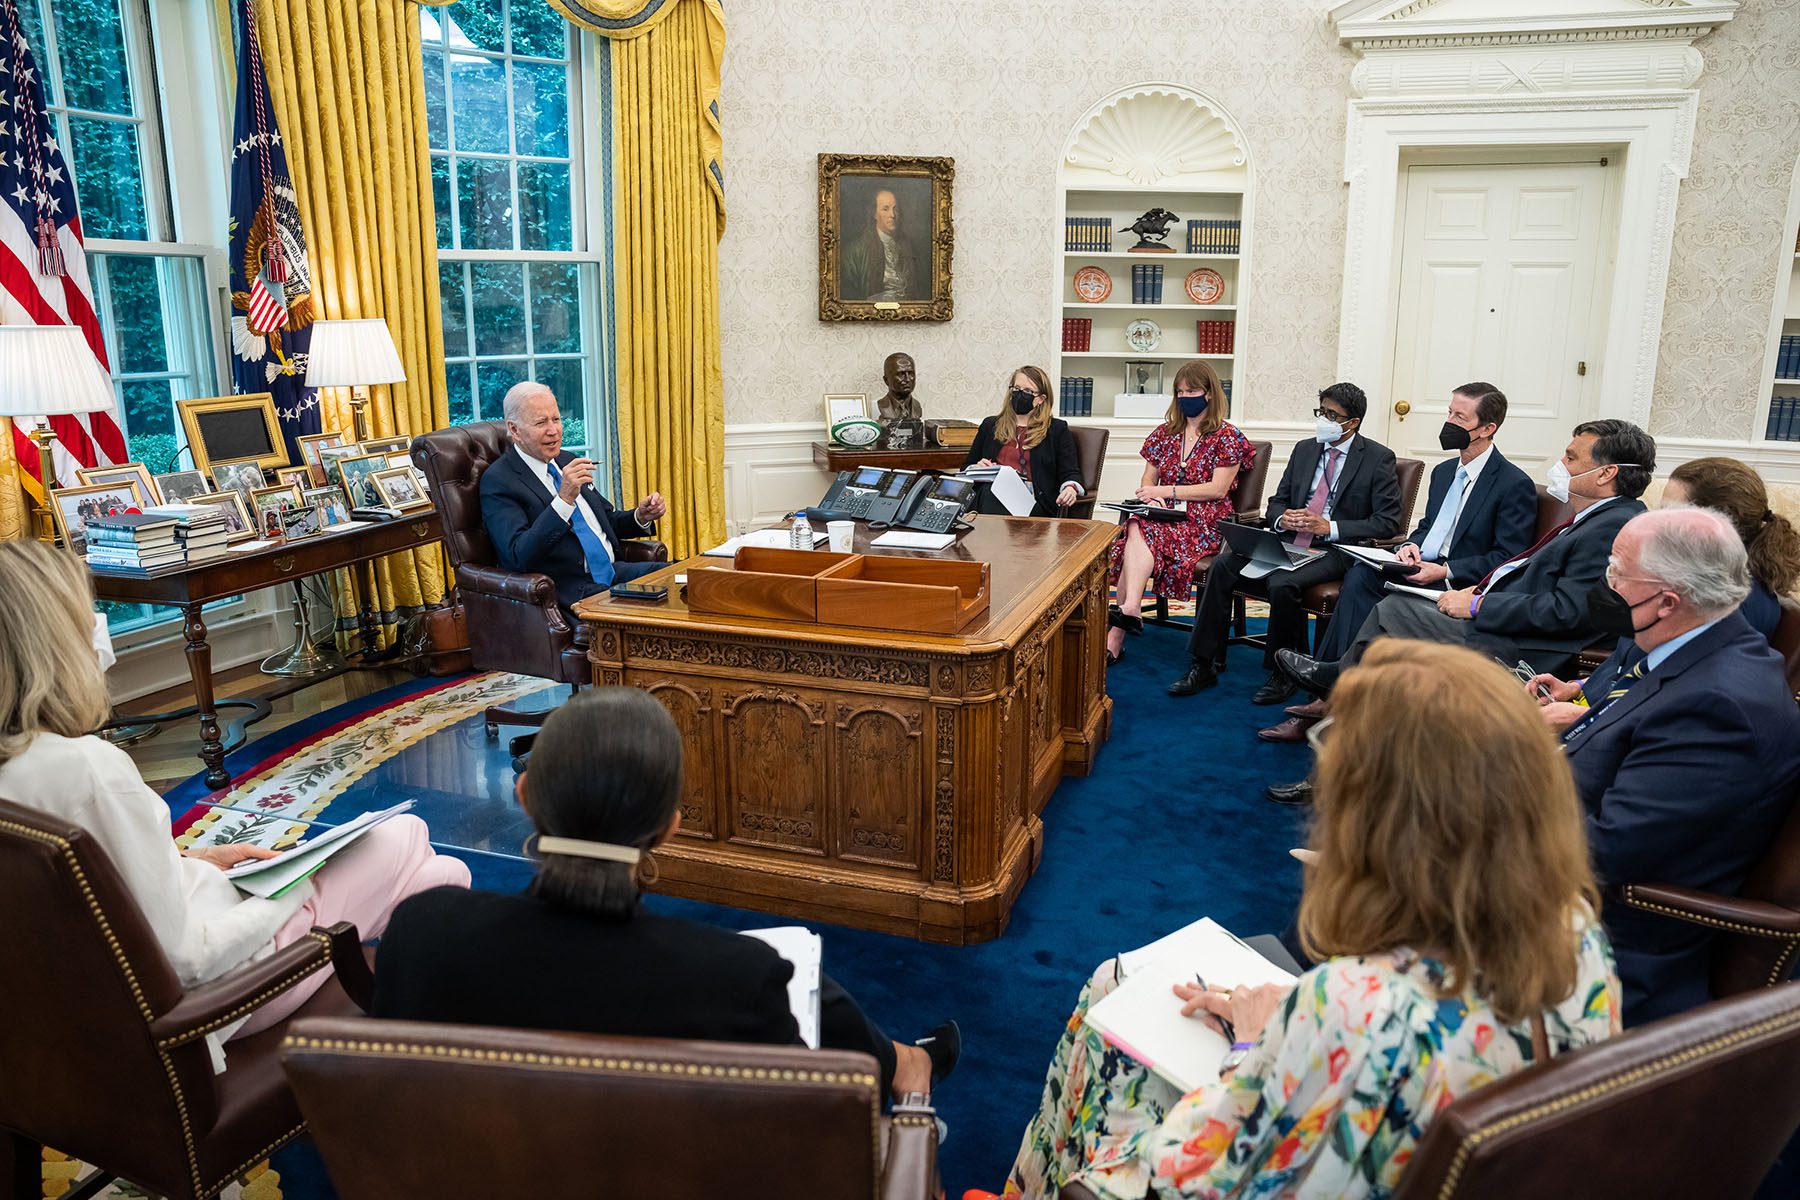 President Biden, joined by senior advisers, reviews remarks on the Supreme Court decision on Dobbs v. Jackson Women’s Health Organization in the Oval Office.